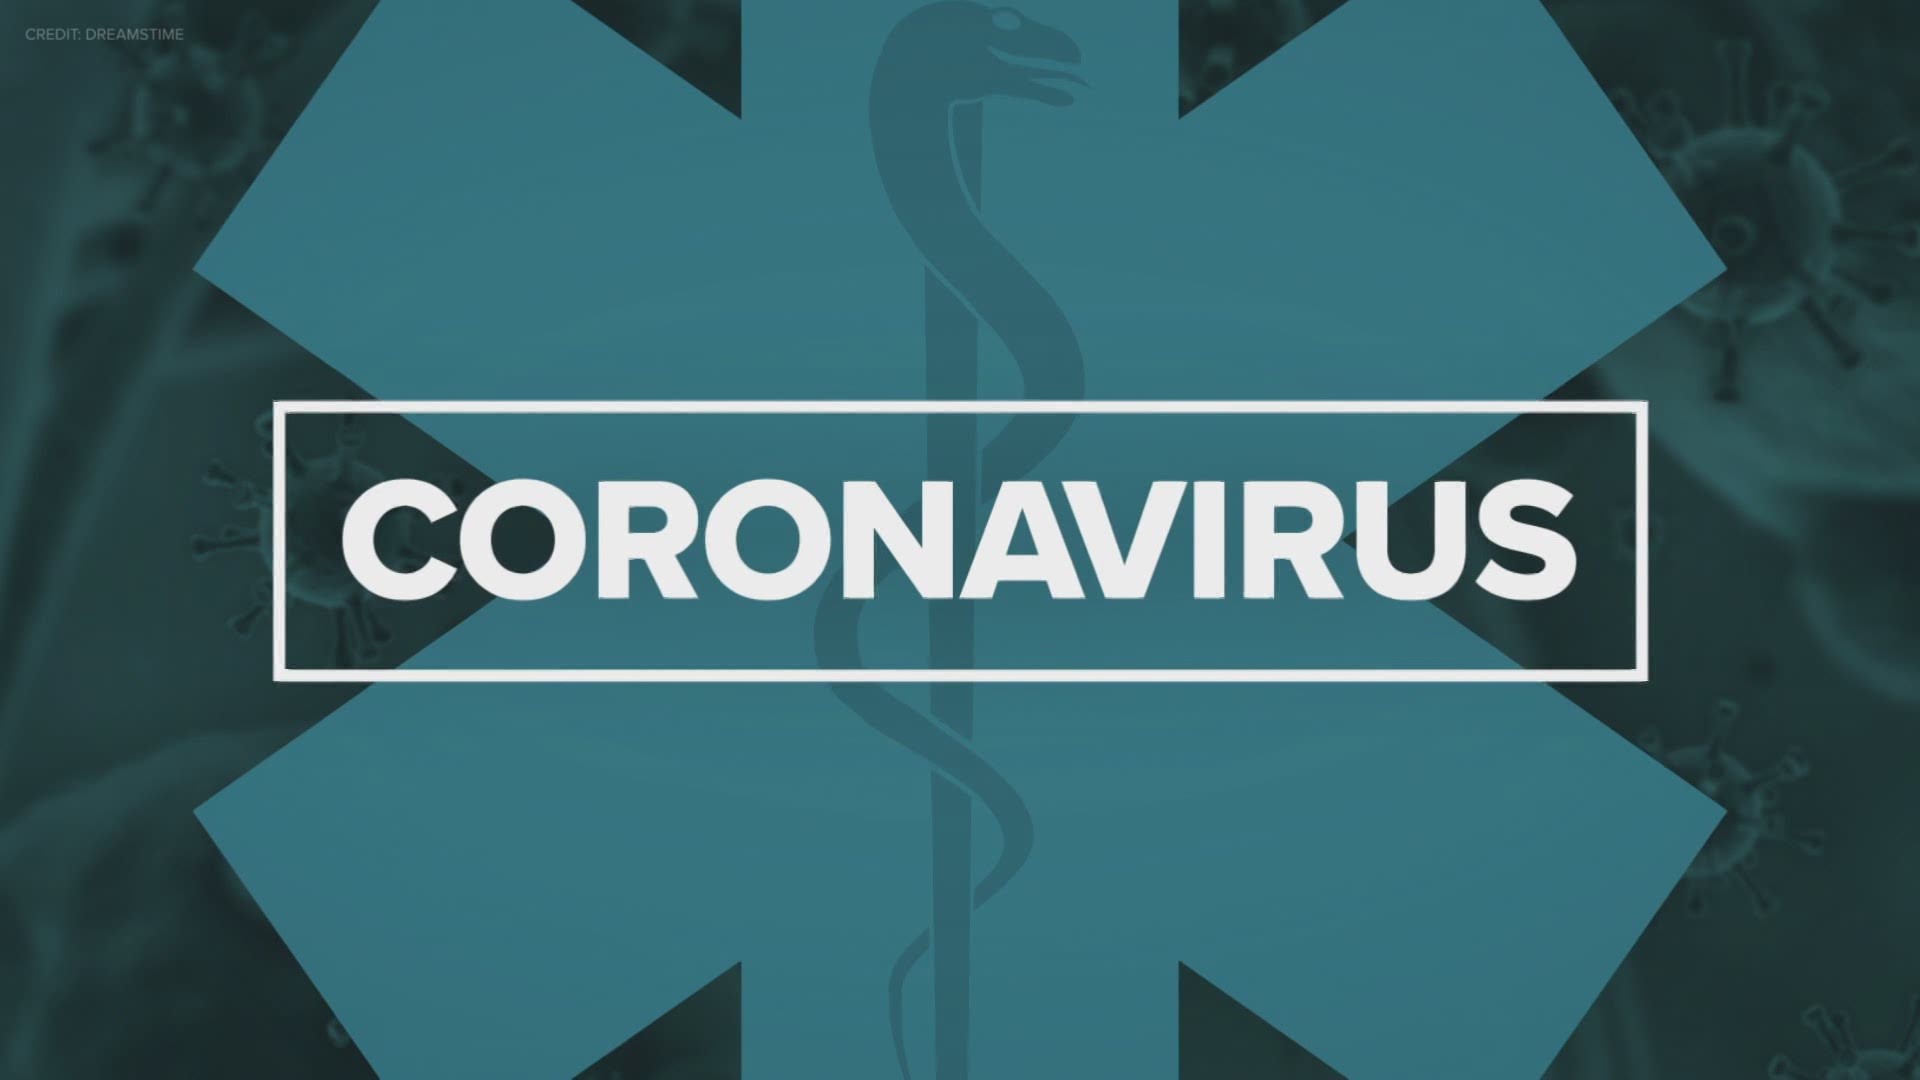 Indiana coronavirus updates: IPS to start school year virtually, Greenfield student tests positive, unemployment numbers go up again — 7/31/2020 Sunrise update